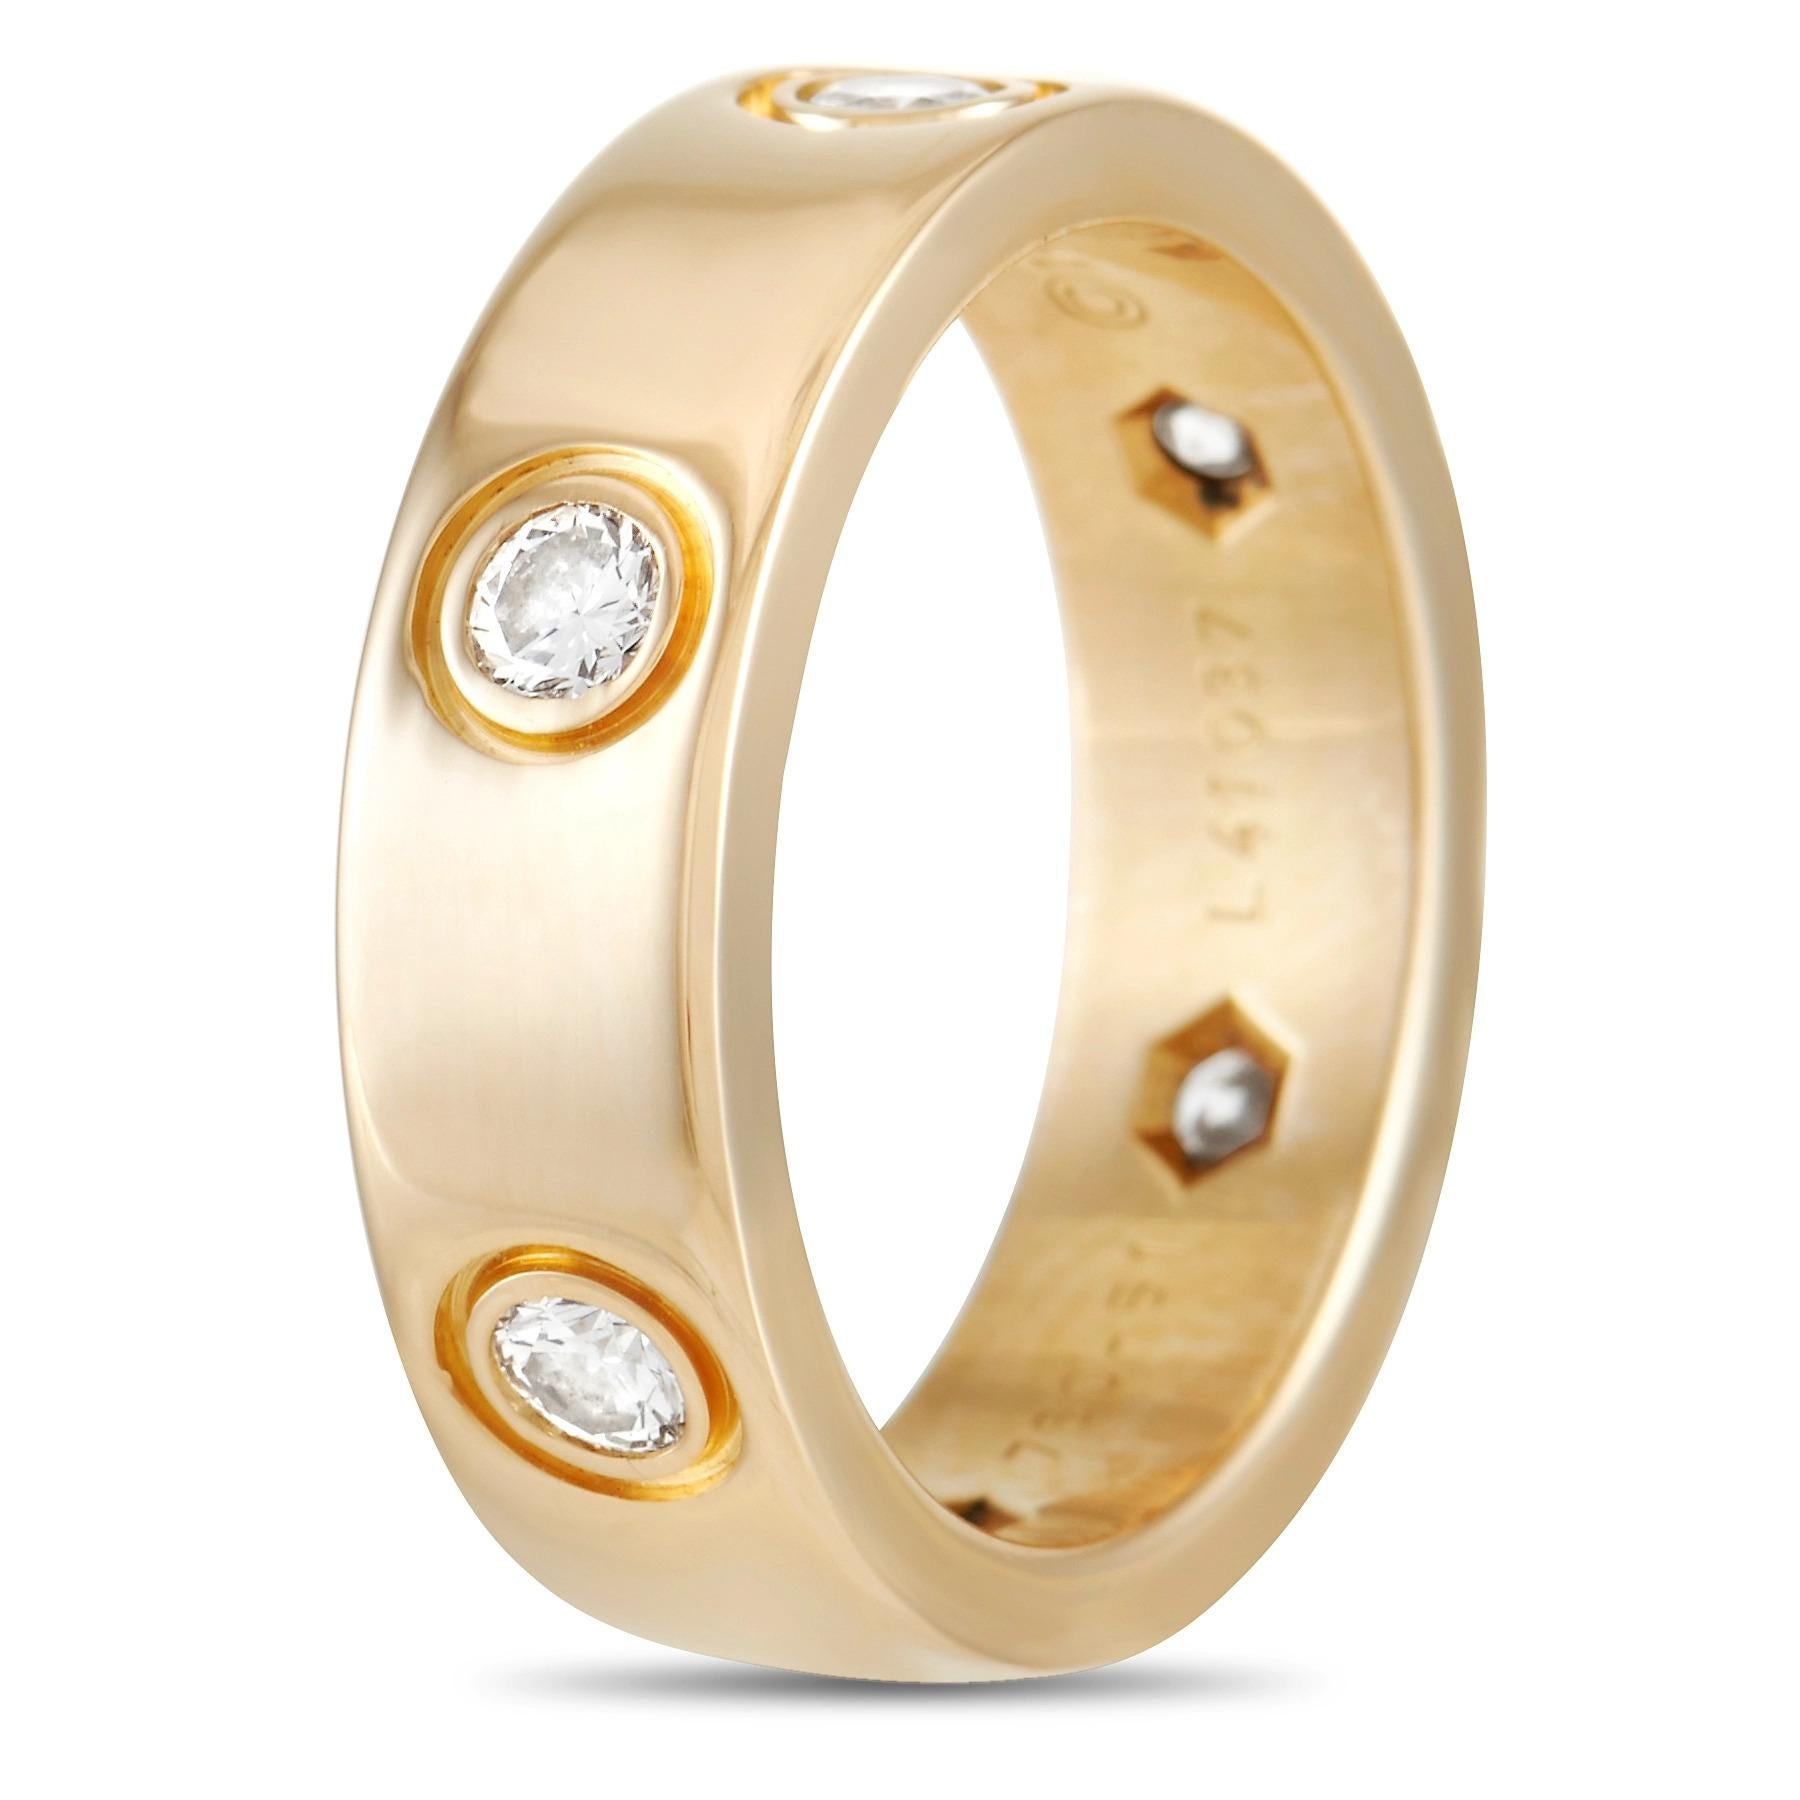 This impeccably designed piece is part of Cartier’s iconic Love collection. Adorning the 5mm wide 18K Yellow Gold band, you’ll find a series of six circular diamonds. Sleek and sophisticated in design, this understated band ring exudes luxury. 
 
